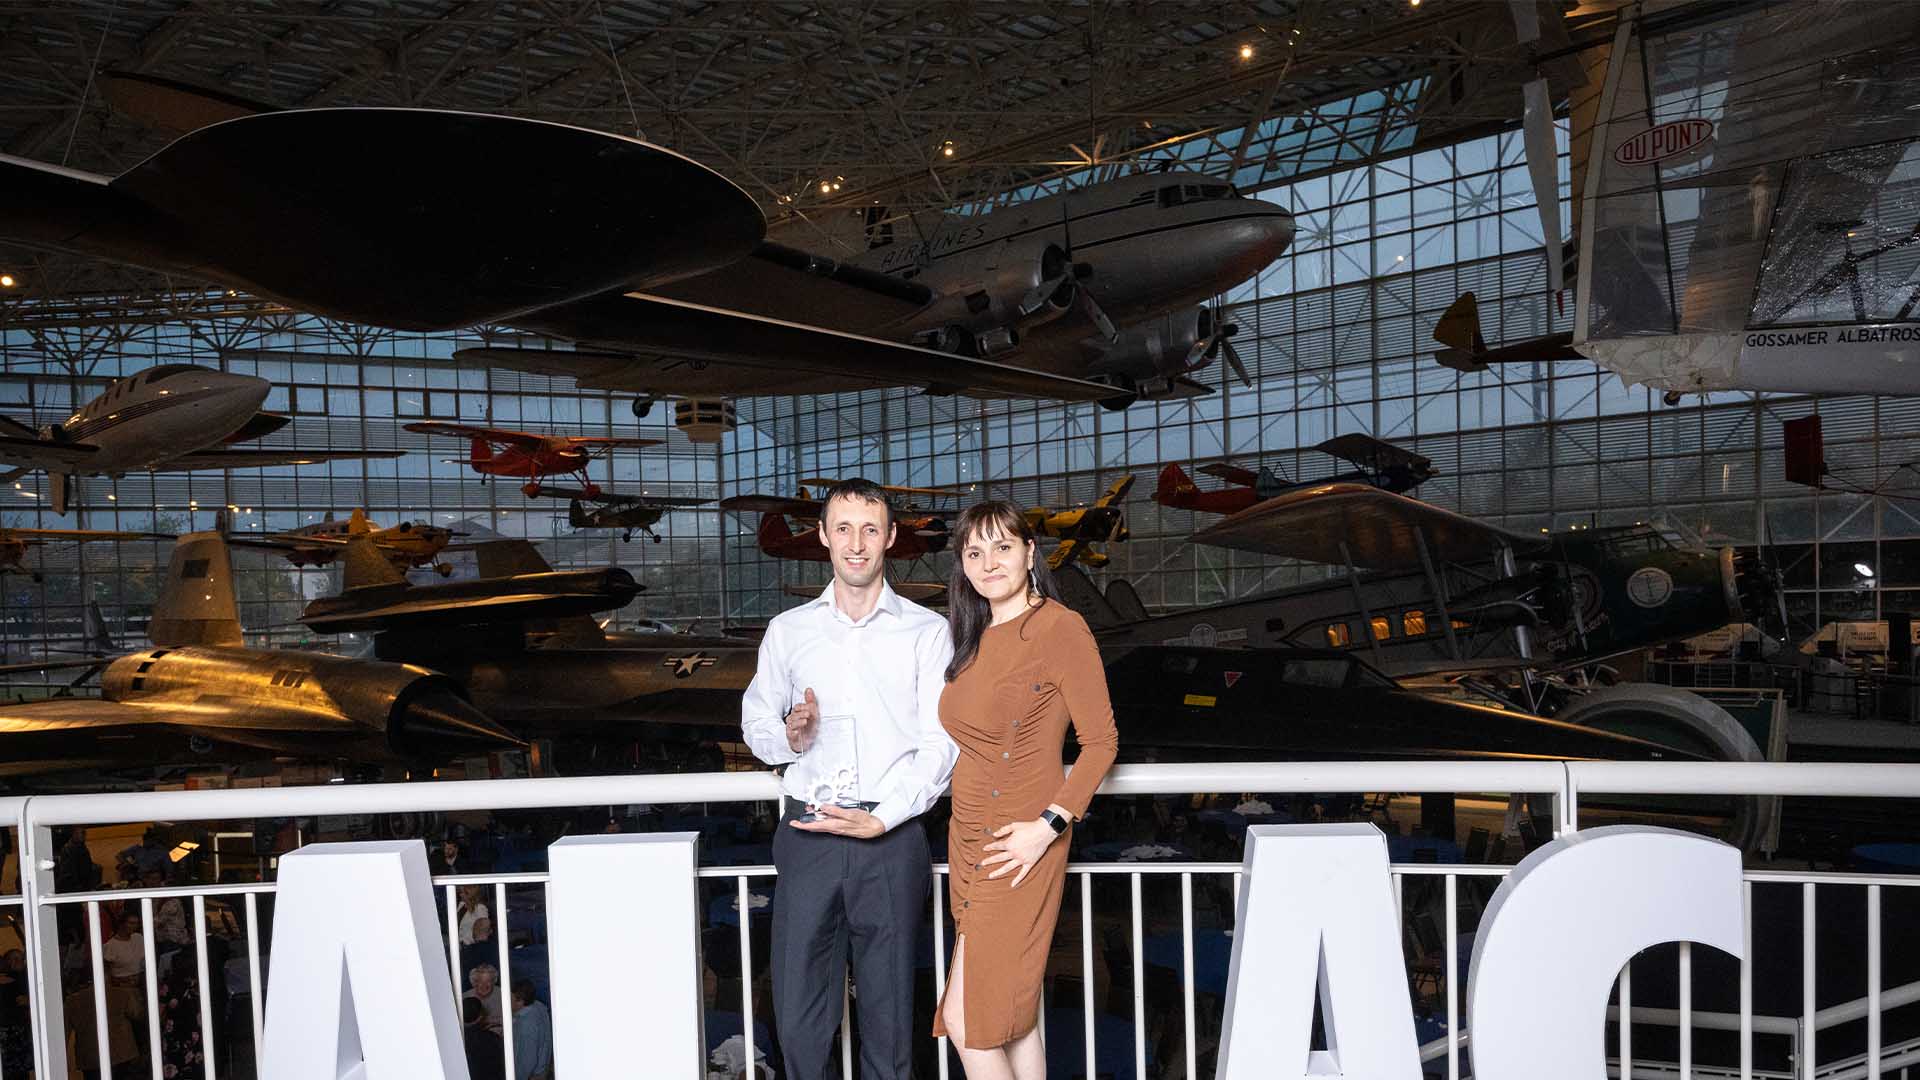 Sergiu and his wife pose for a photo after the conclusion of AJAC's 2023 apprenticeship graduation at the Museum of Flight.